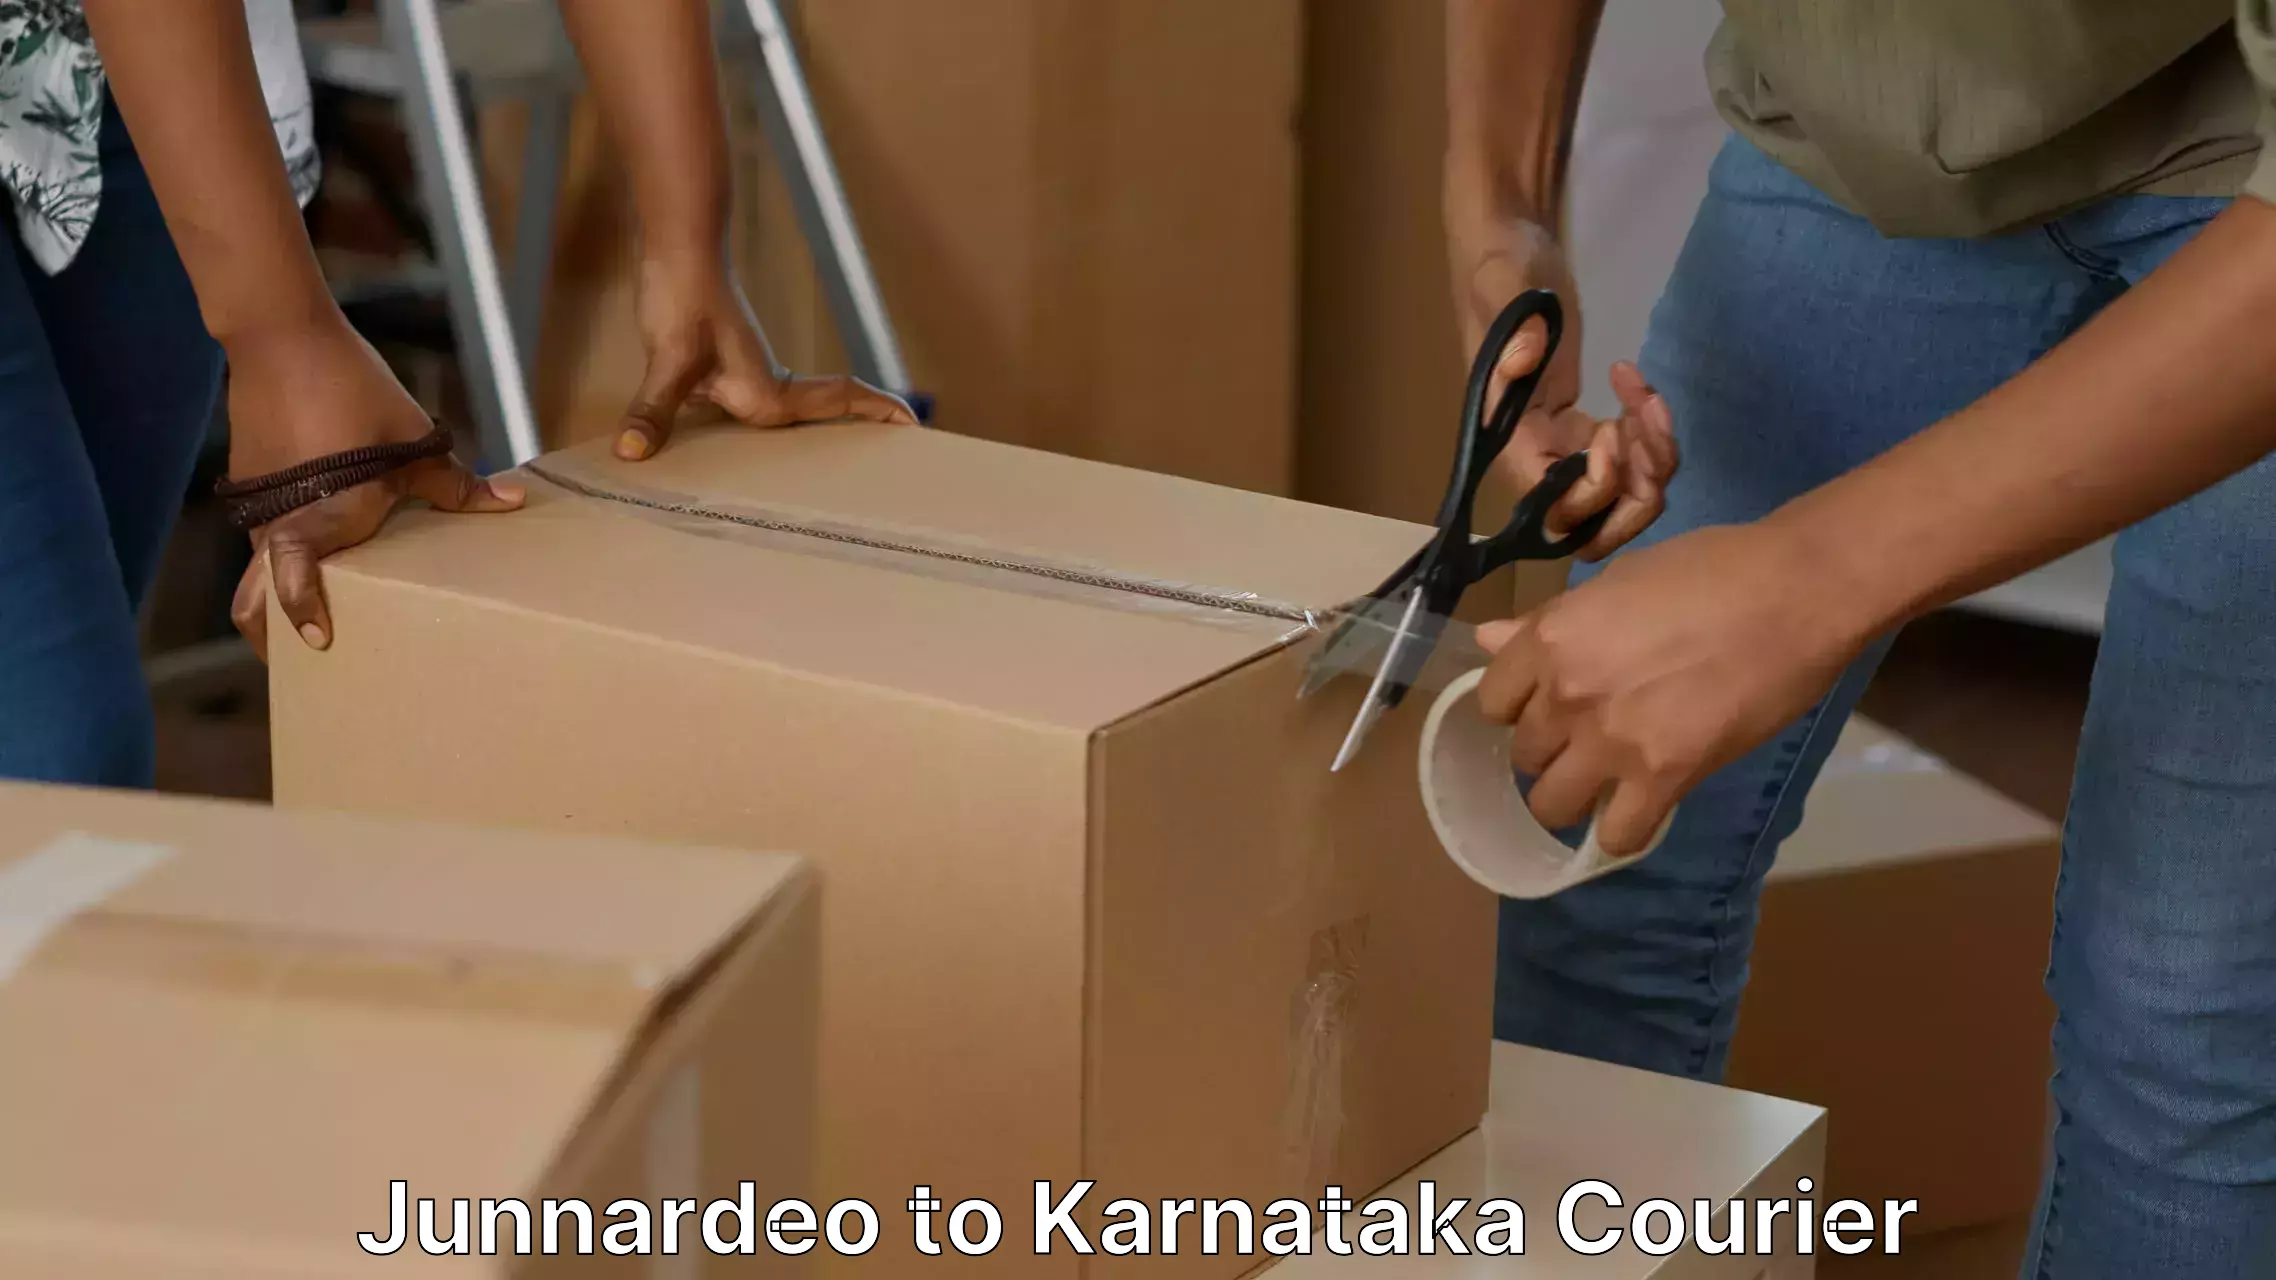 Reliable moving assistance Junnardeo to Dharwad